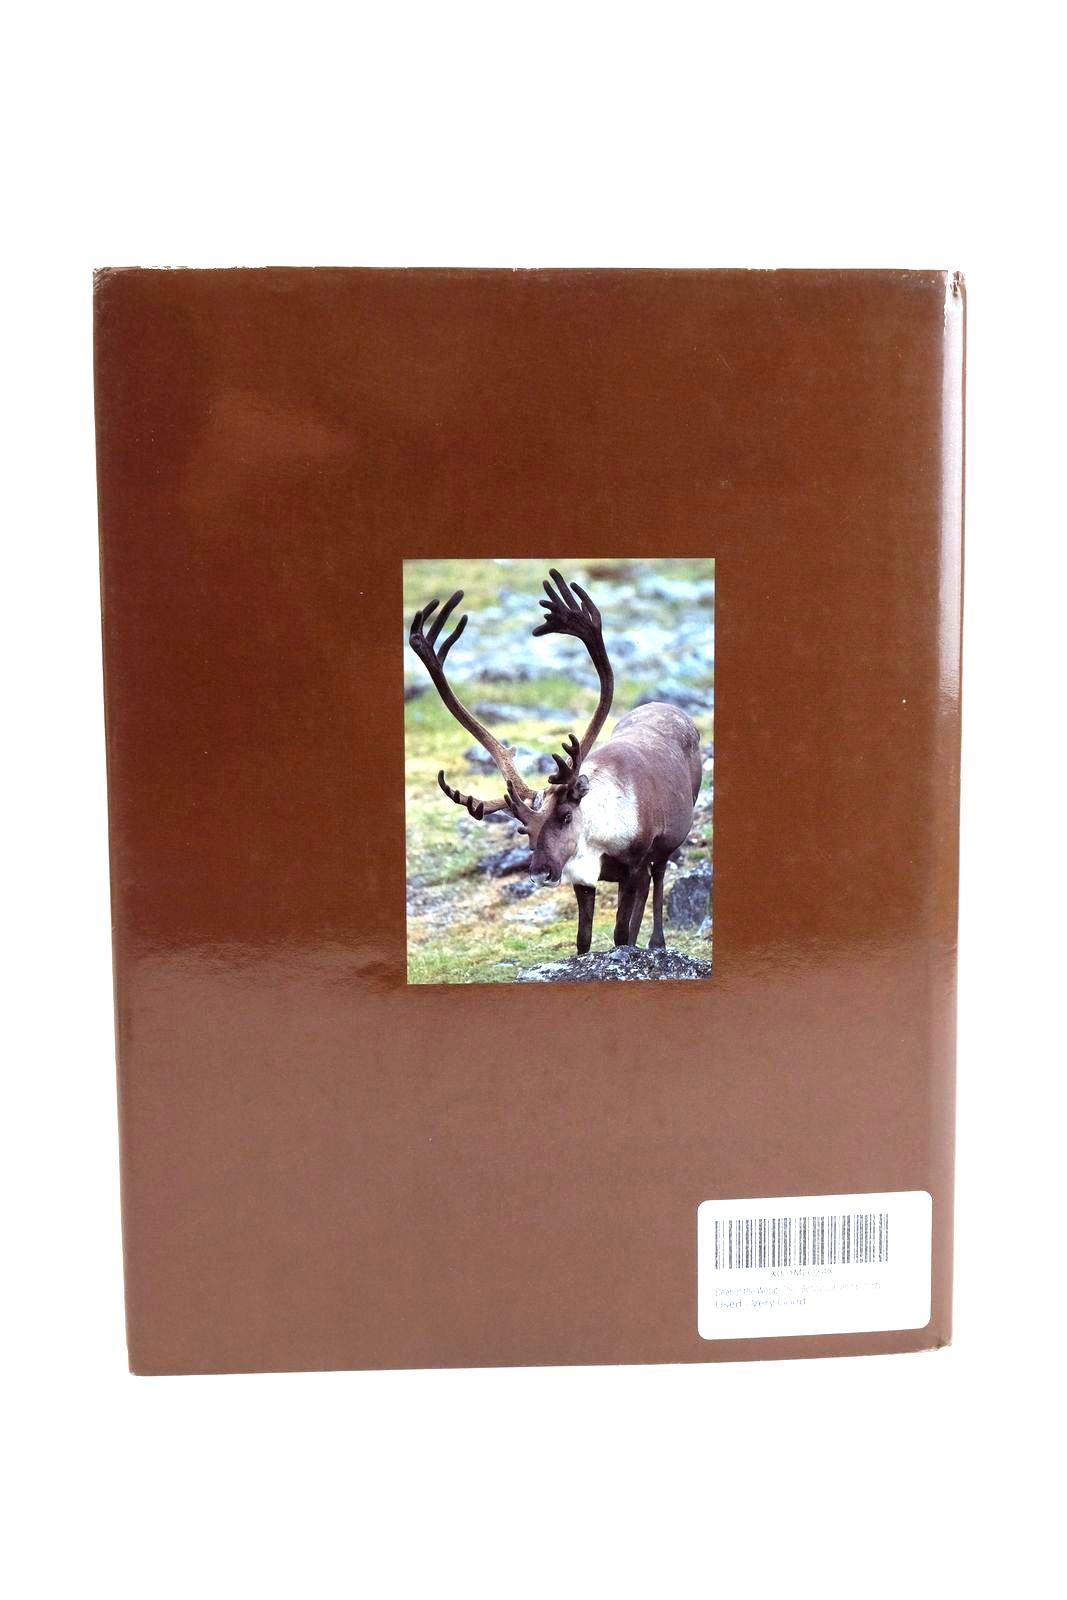 Photo of DEER OF THE WORLD written by Geist, Valerius published by Swan Hill Press (STOCK CODE: 1324351)  for sale by Stella & Rose's Books